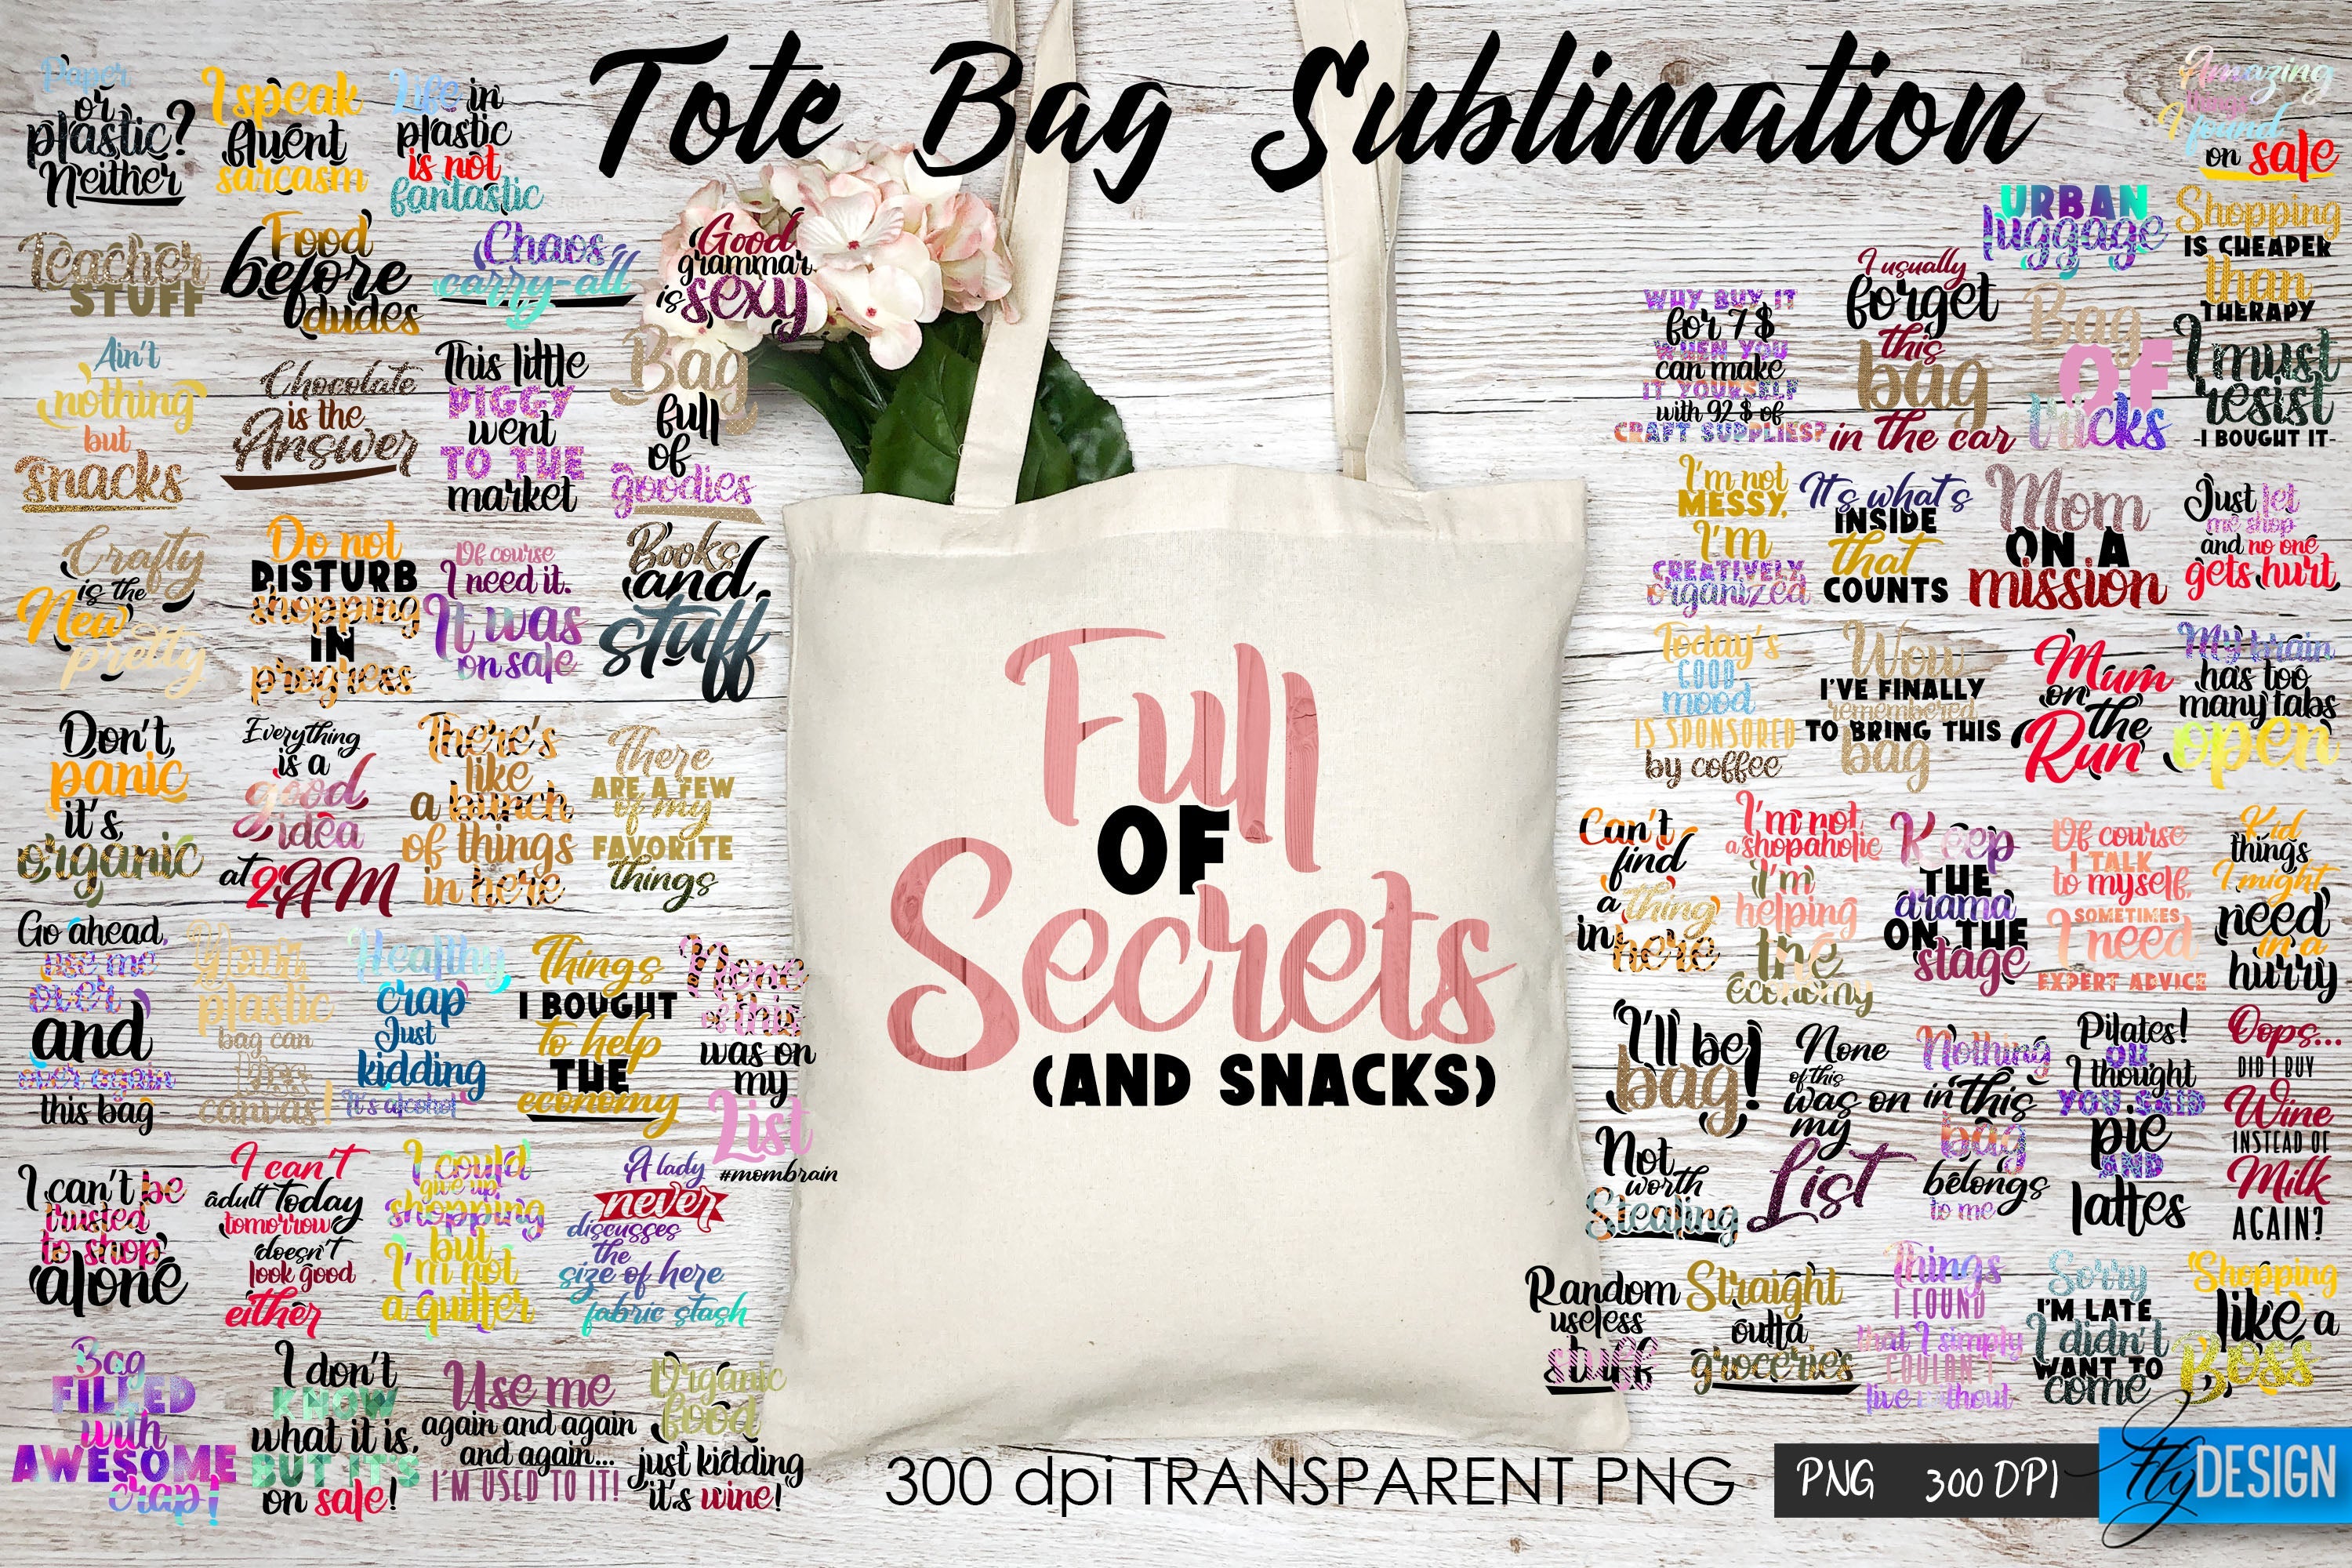 Crafty stuff  Tote bag svg quote - So Fontsy